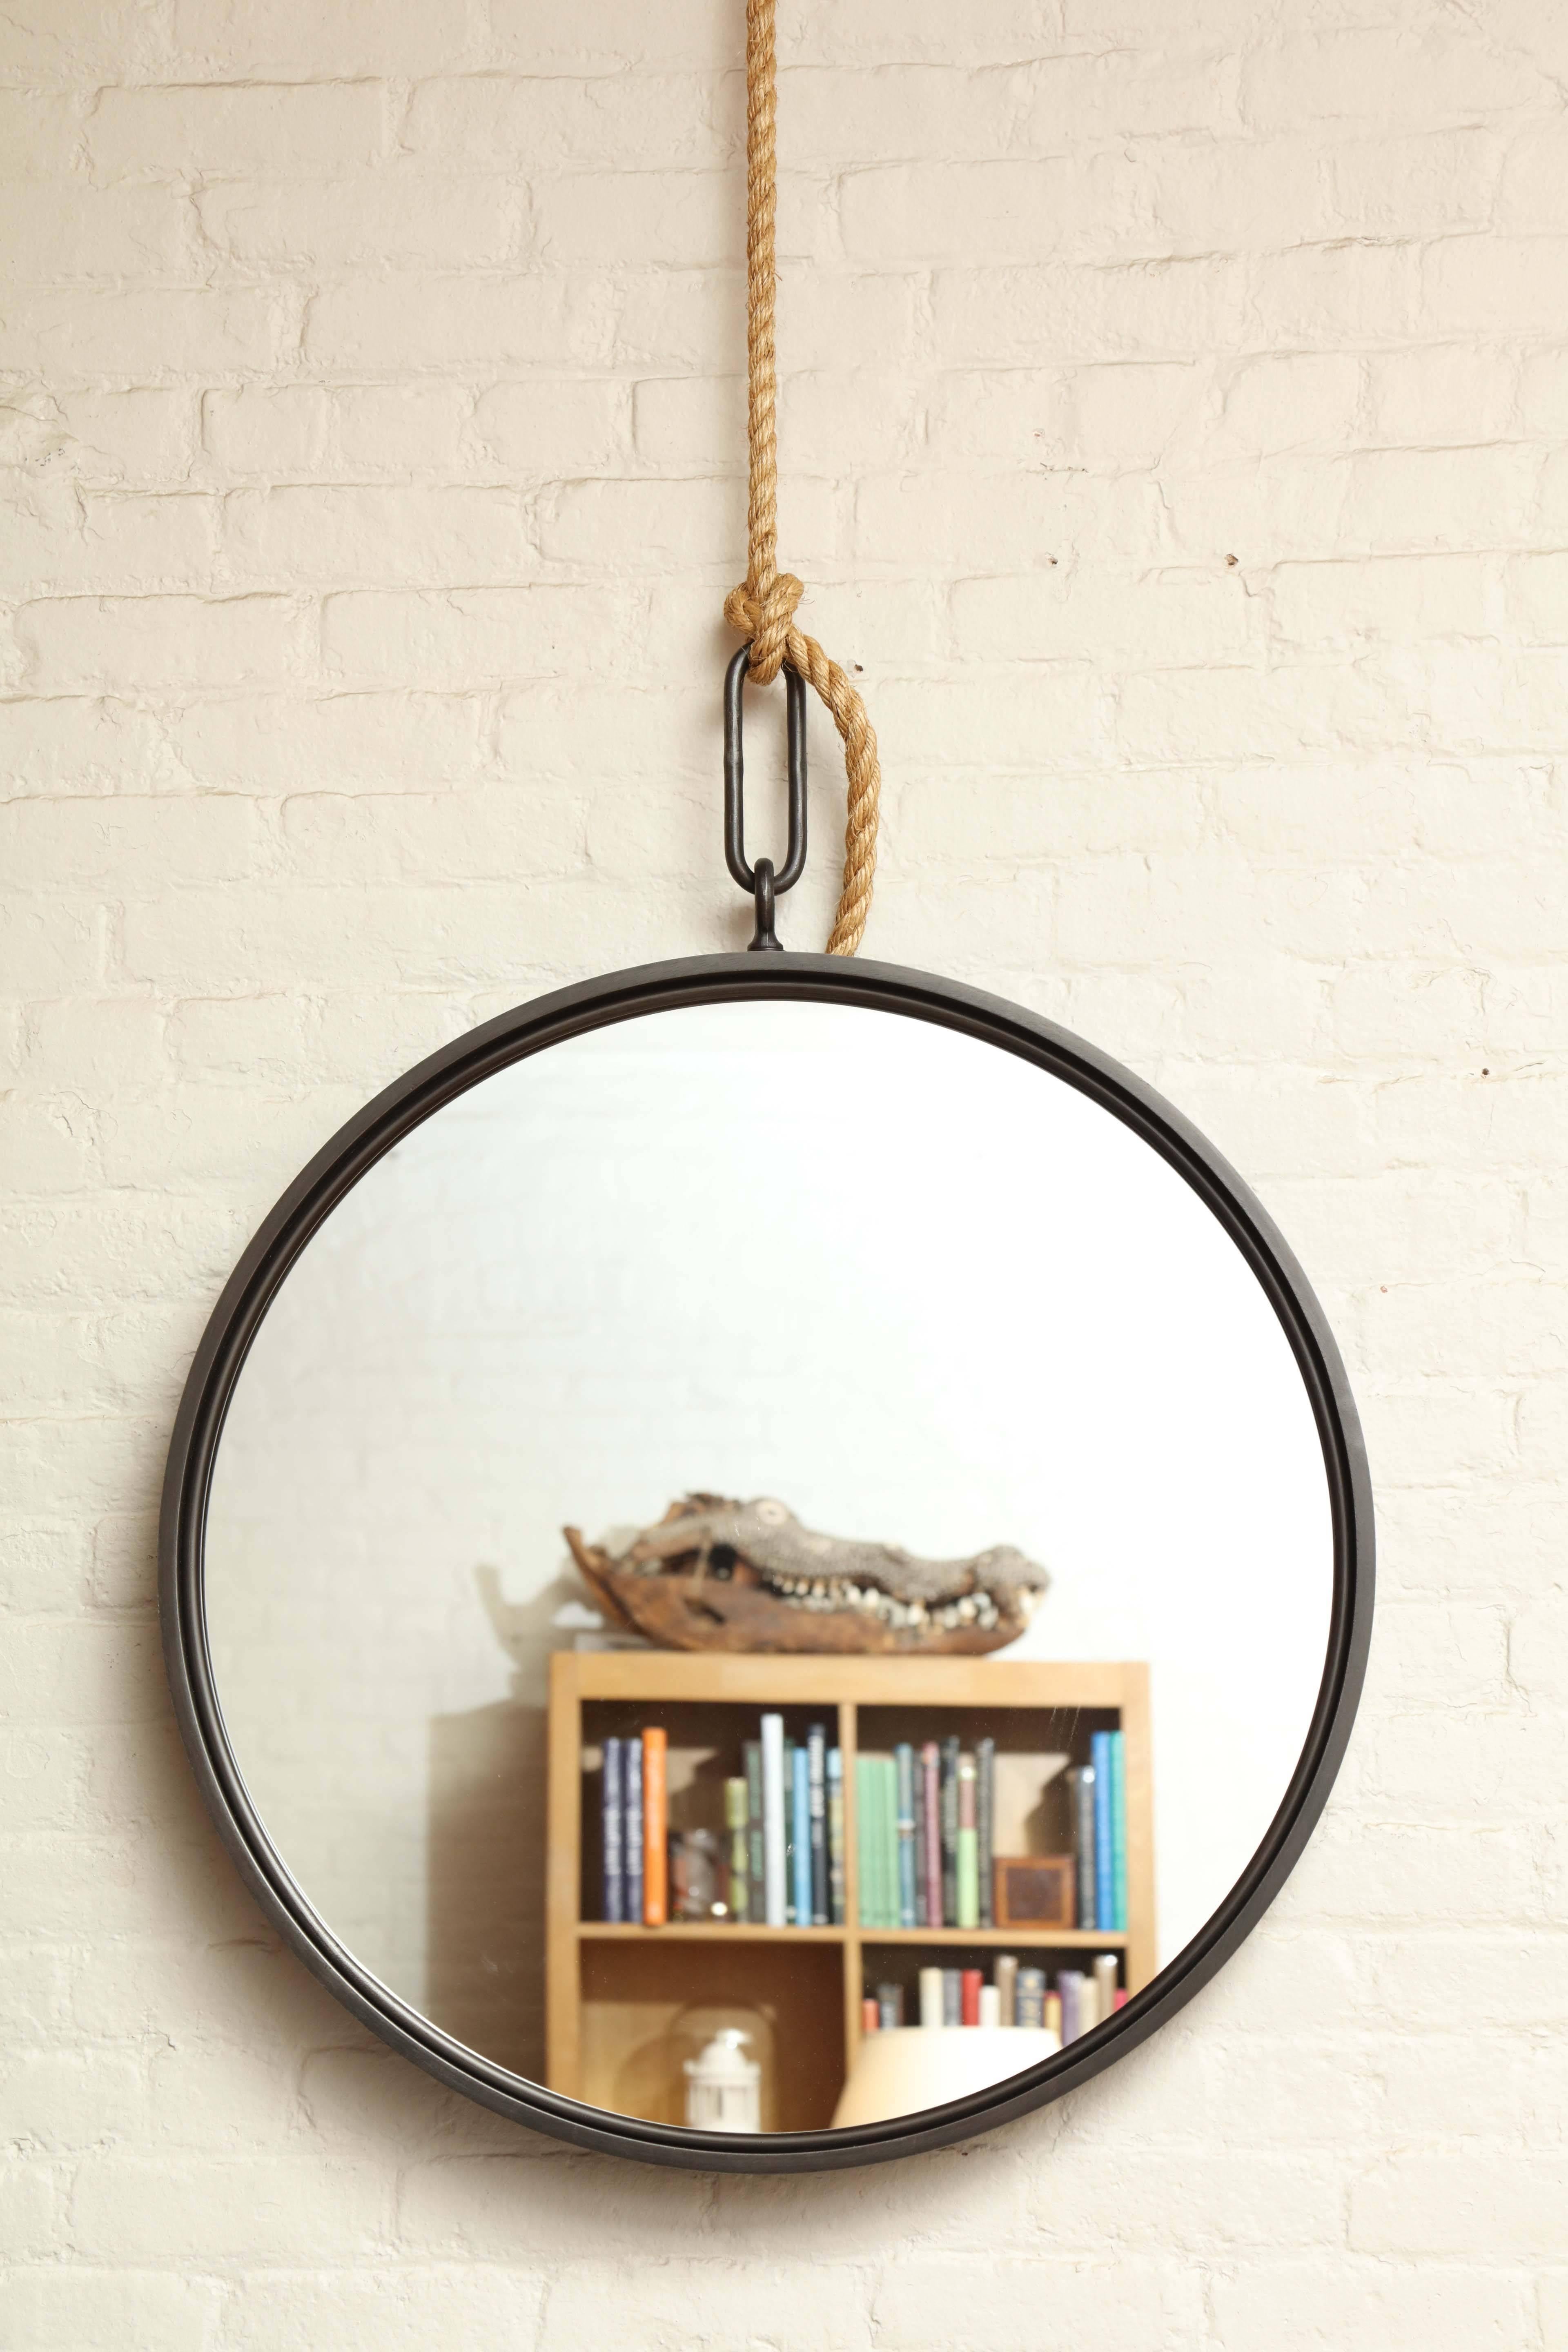 A BURDEN Contemporary round pendant mirror in blackened steel with clear glass. Can be hung directly on backplate (provided) or on rope (please specify rope length). Two available in 30.5